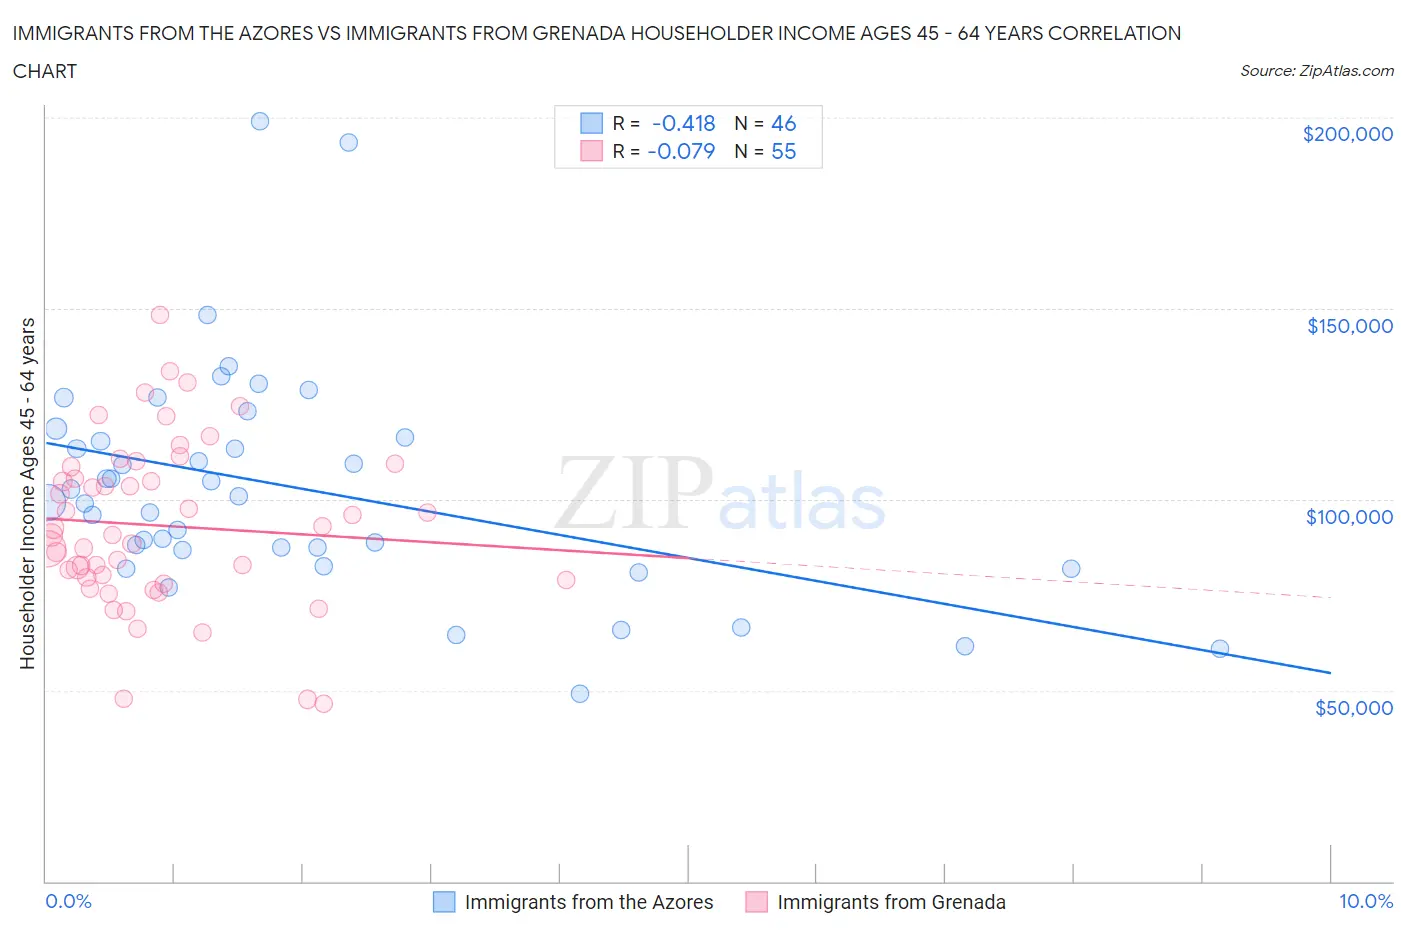 Immigrants from the Azores vs Immigrants from Grenada Householder Income Ages 45 - 64 years